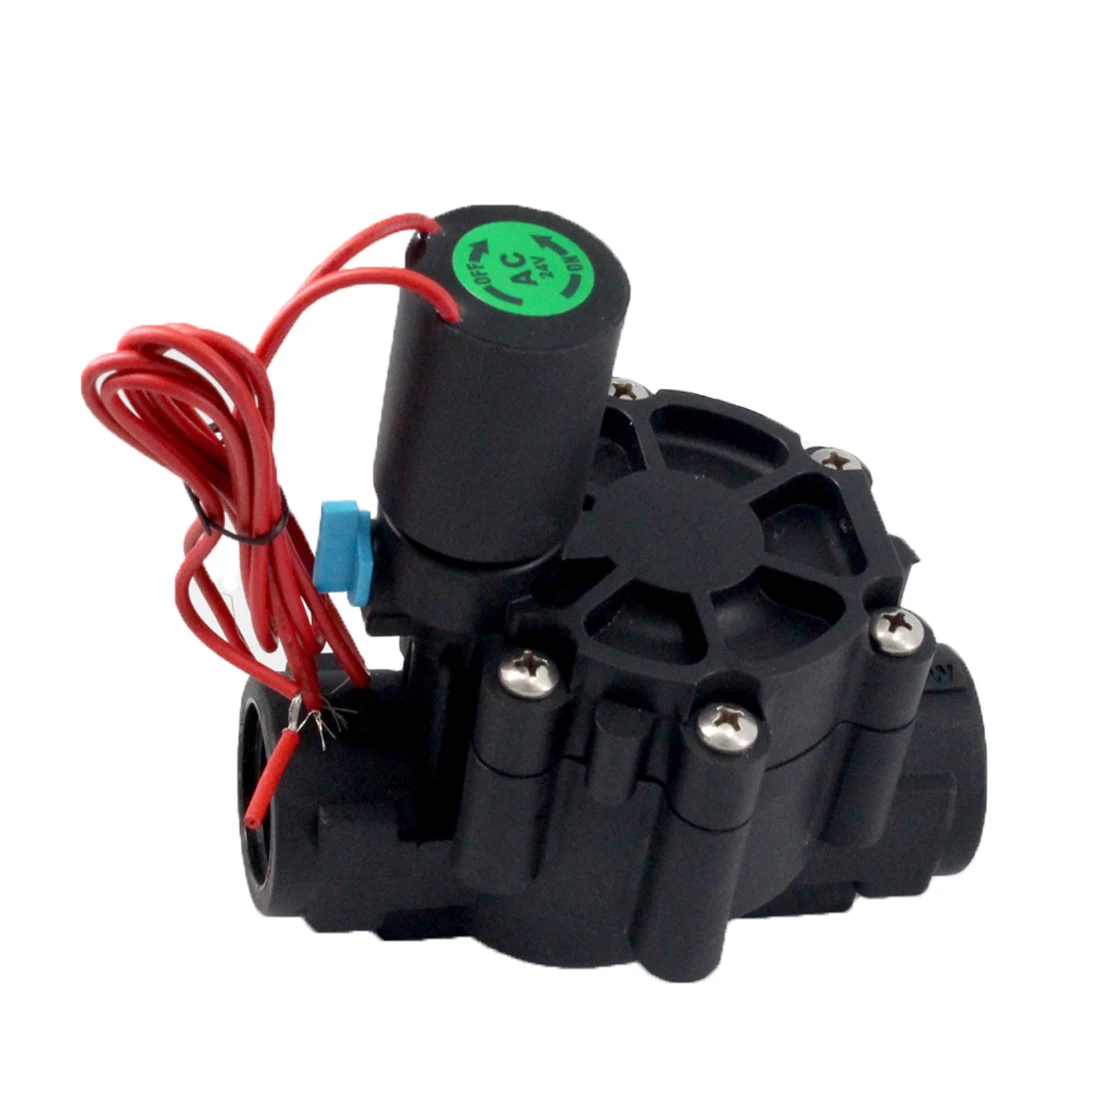 Irrigation Solenoid Valve Small Diameter Spray Drip Manual Switch Automatic With Flow Adjustment With External